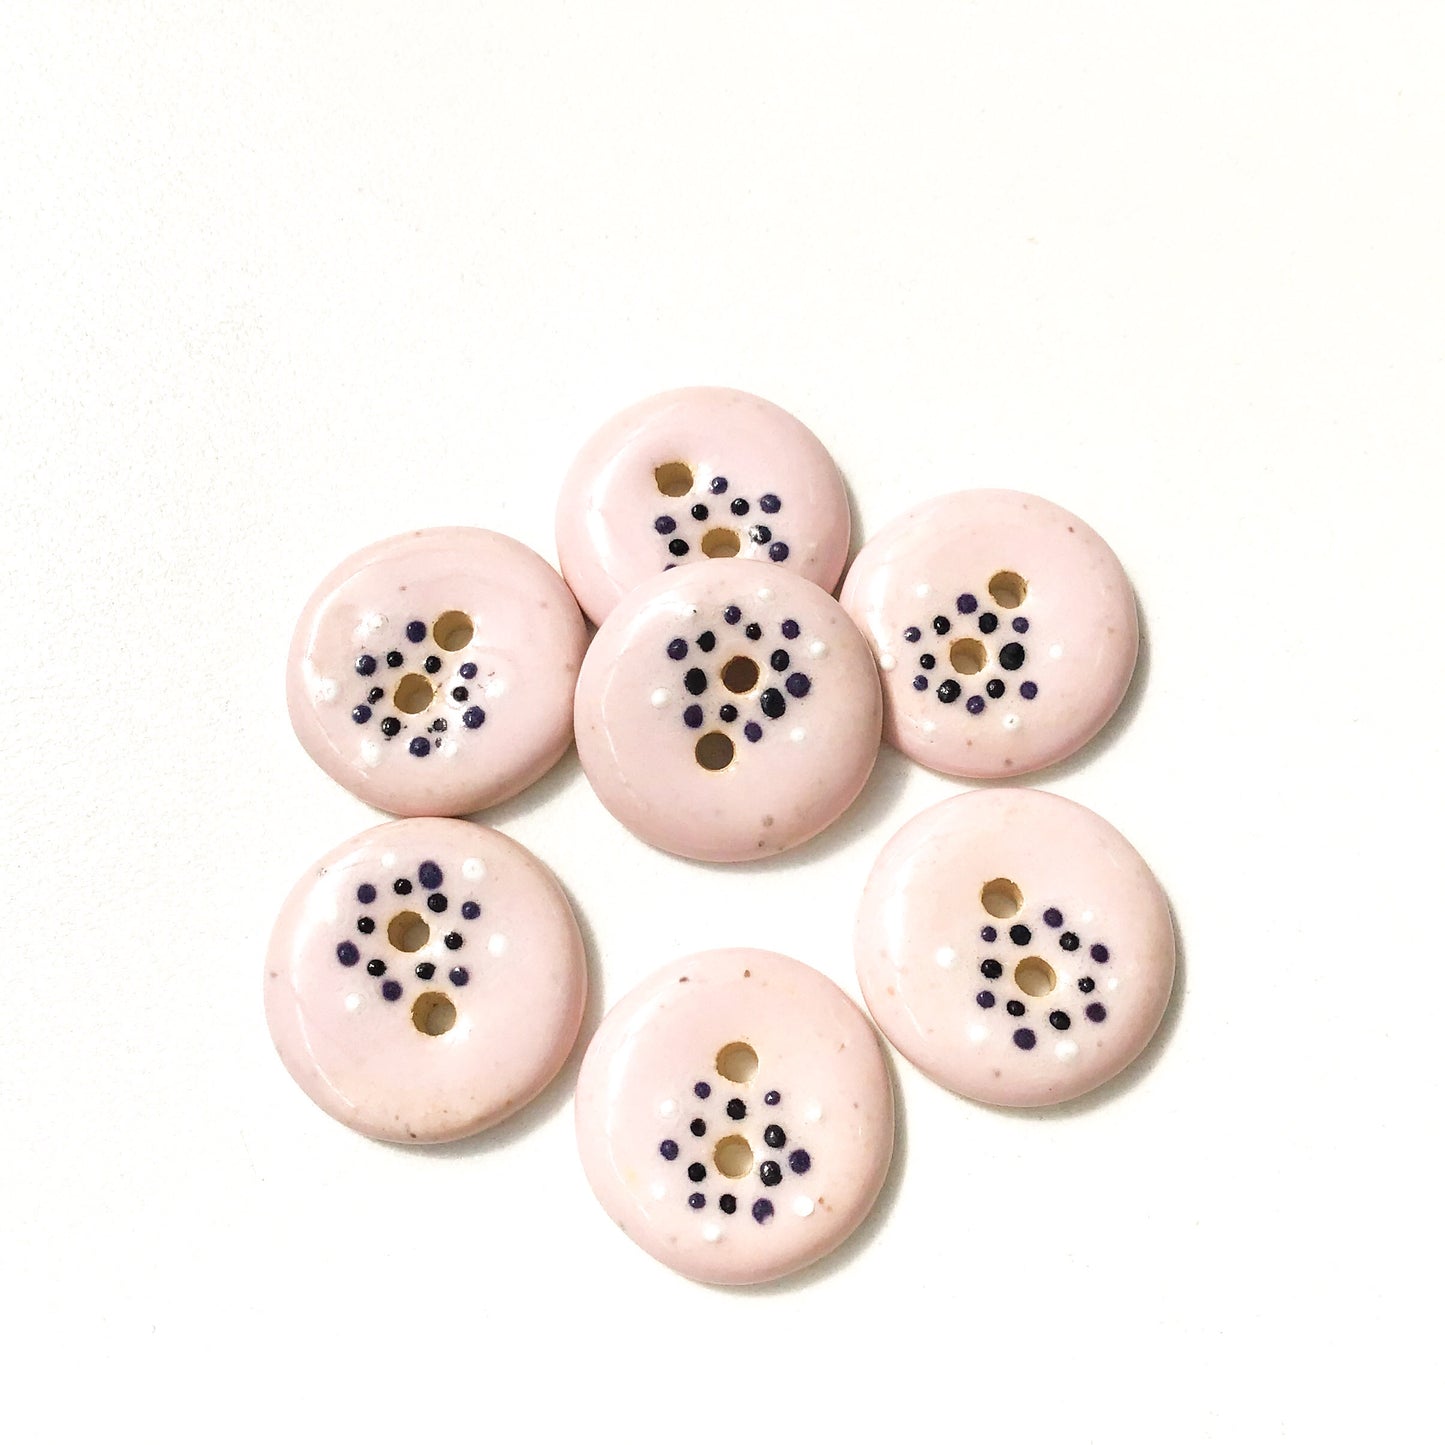 Soft Pink "Spark" Ceramic Buttons - Pink Clay Buttons - 3/4" - 7 Pack